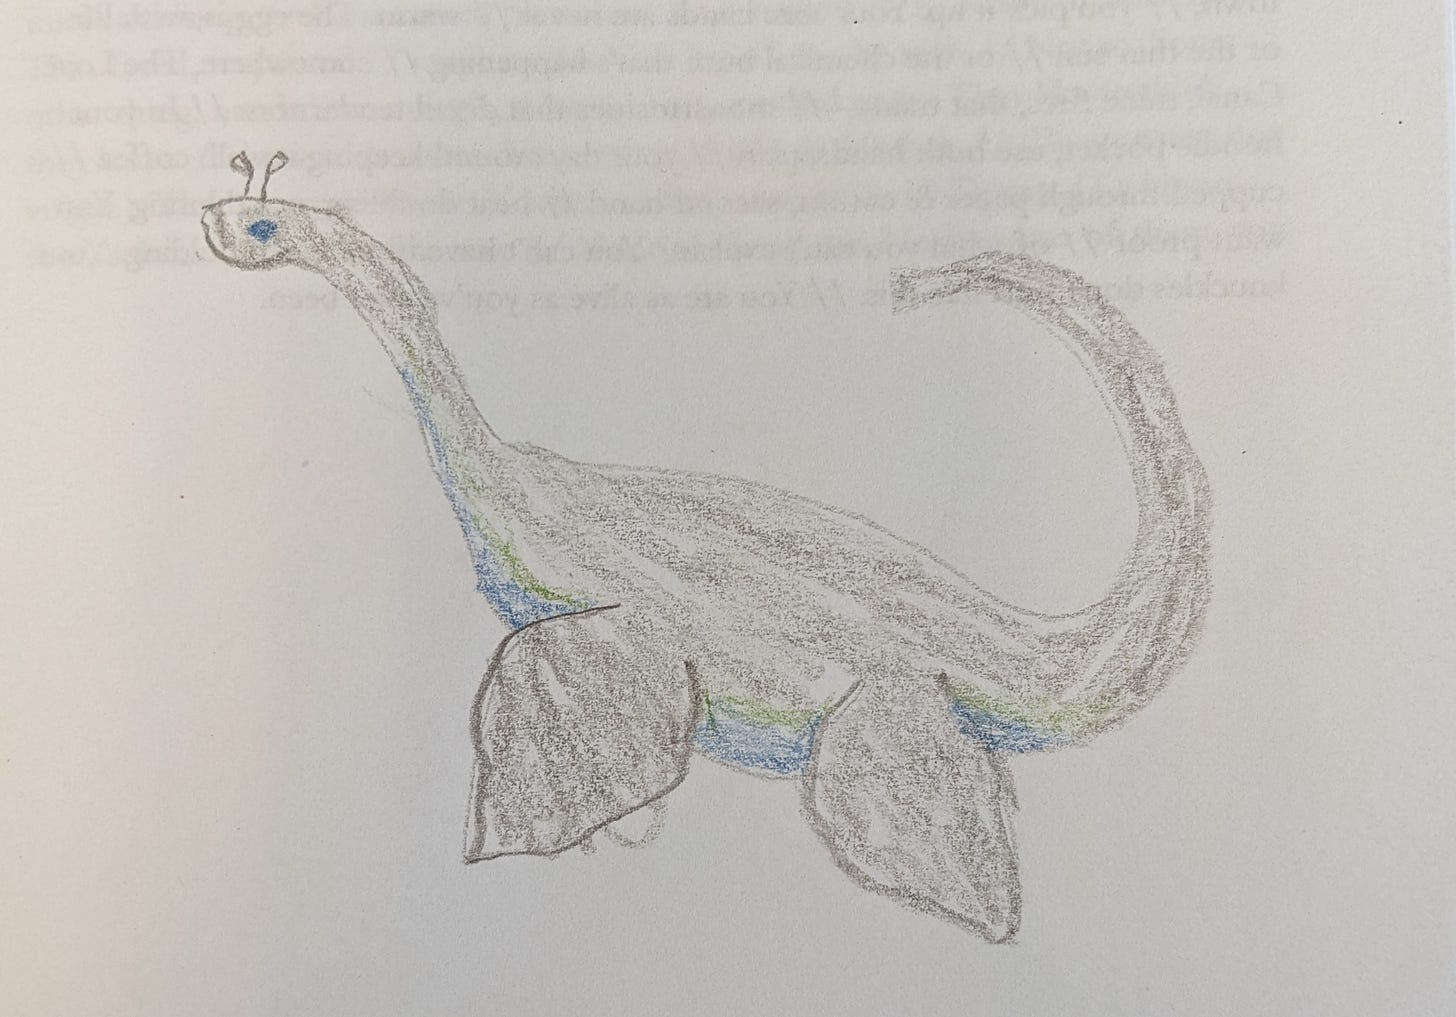 A colored pencil drawing of a plesiosaur-inspired lake monster